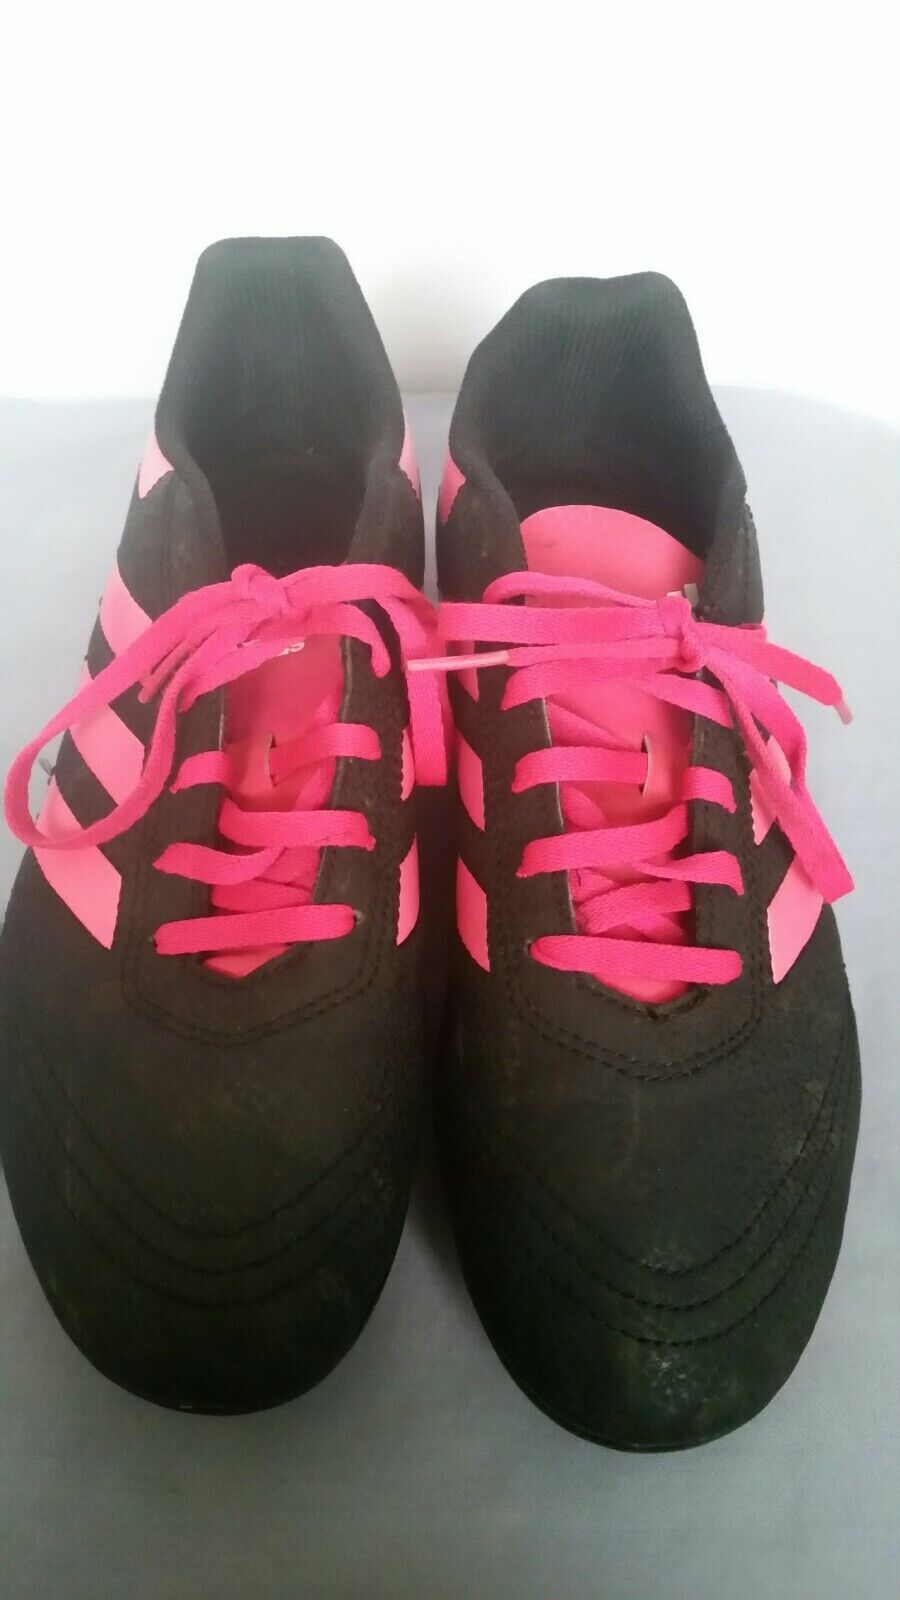 Adidas Women's Soccer Cleats Size Surprise price At the price of surprise 6 Electric Pink St Three Black